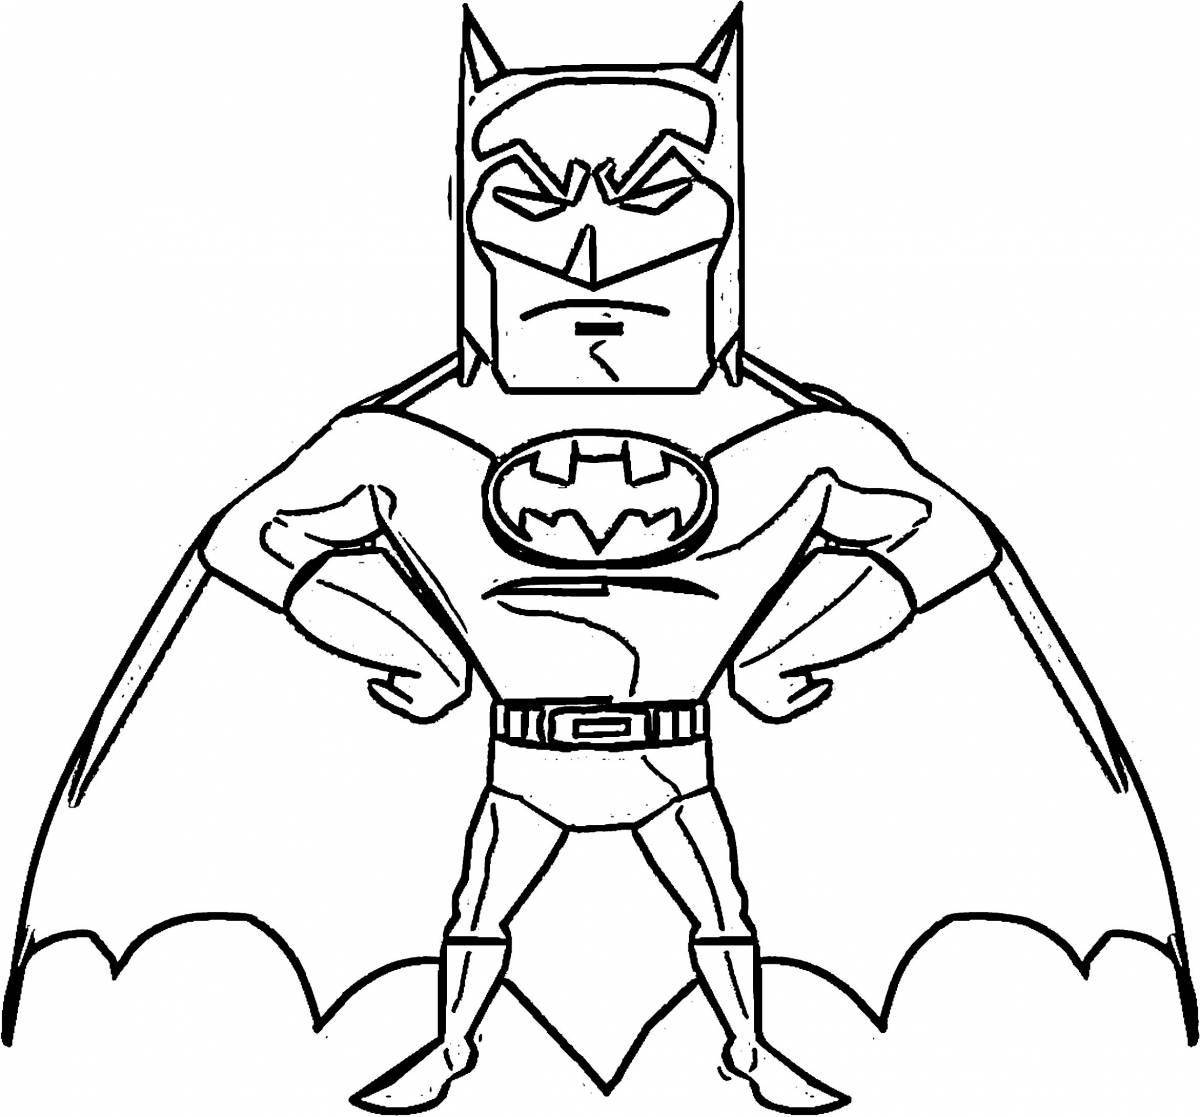 Playful batman coloring page for kids